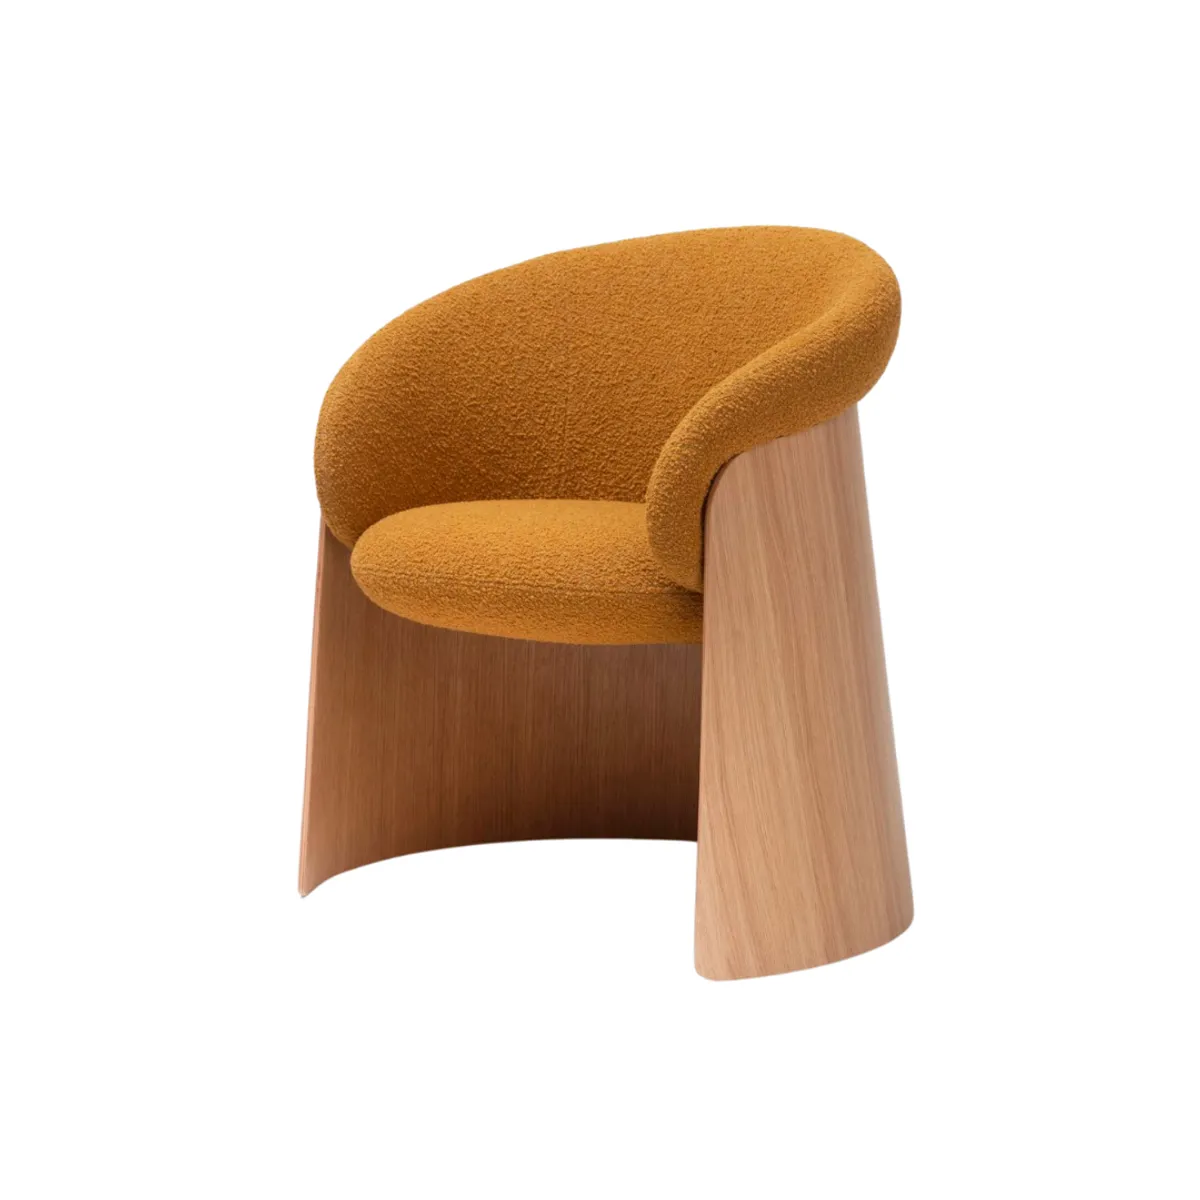 Ginger wooden lounge chair 2